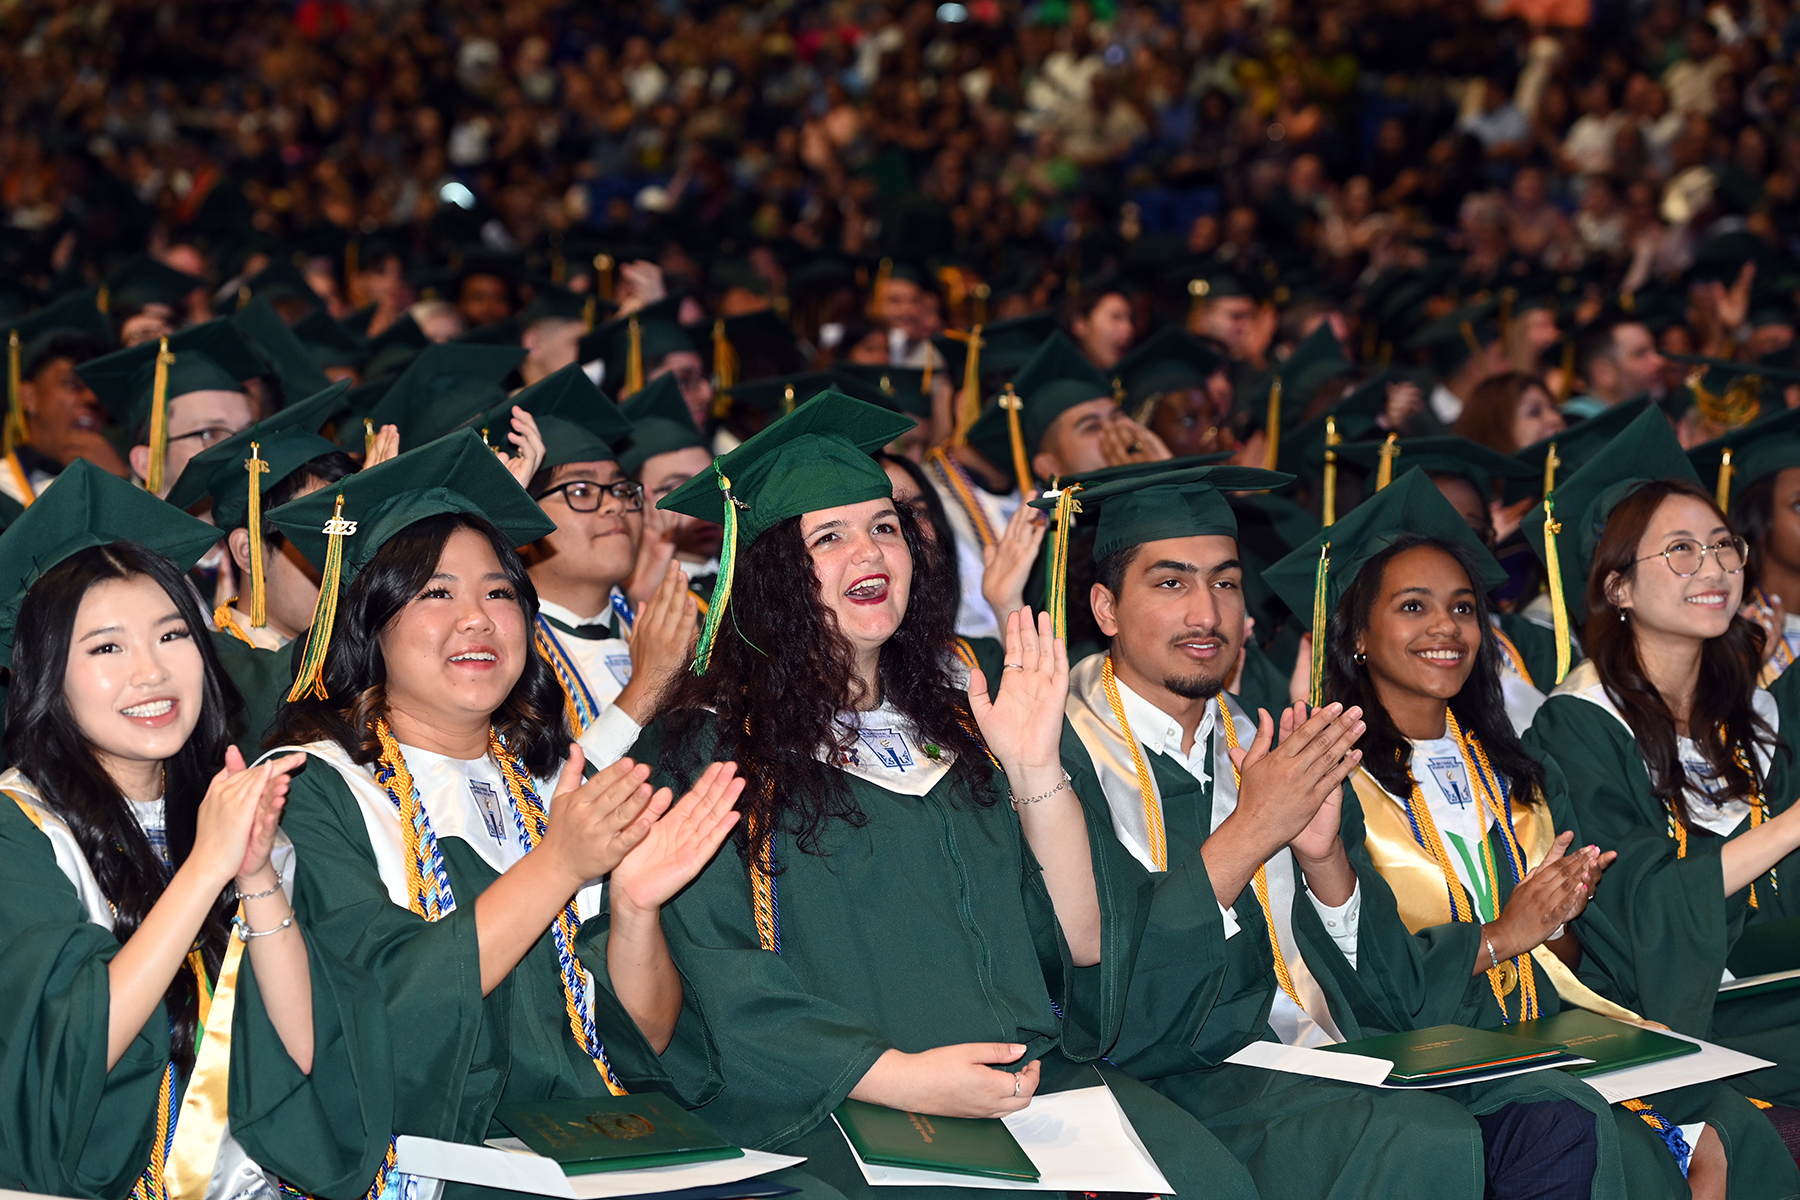 Cypress-Fairbanks ISD Graduation Schedules, Ticket Information and More